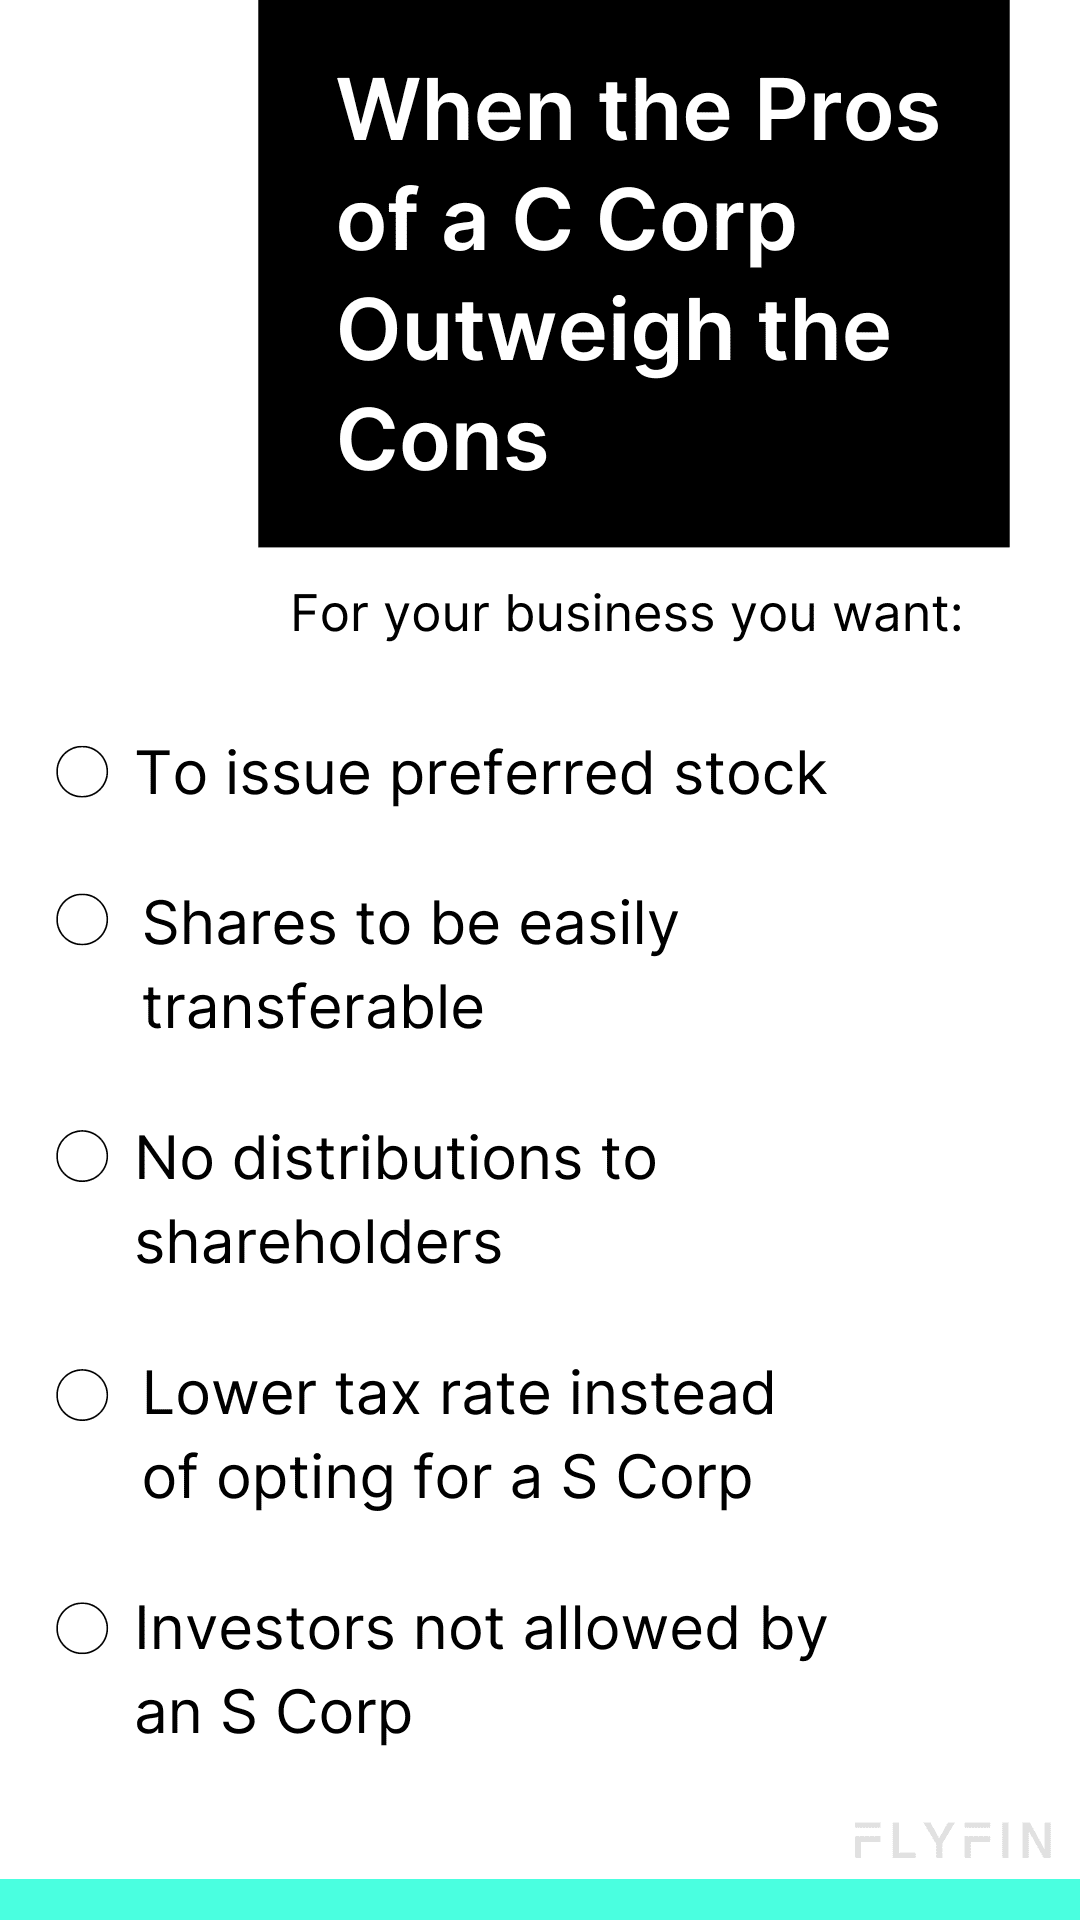 Image describing the benefits of a C Corp over an S Corp, including preferred stock issuance, transferable shares, lower tax rates, and restrictions on distributions and investors. Relevant for business owners and those concerned with taxes.